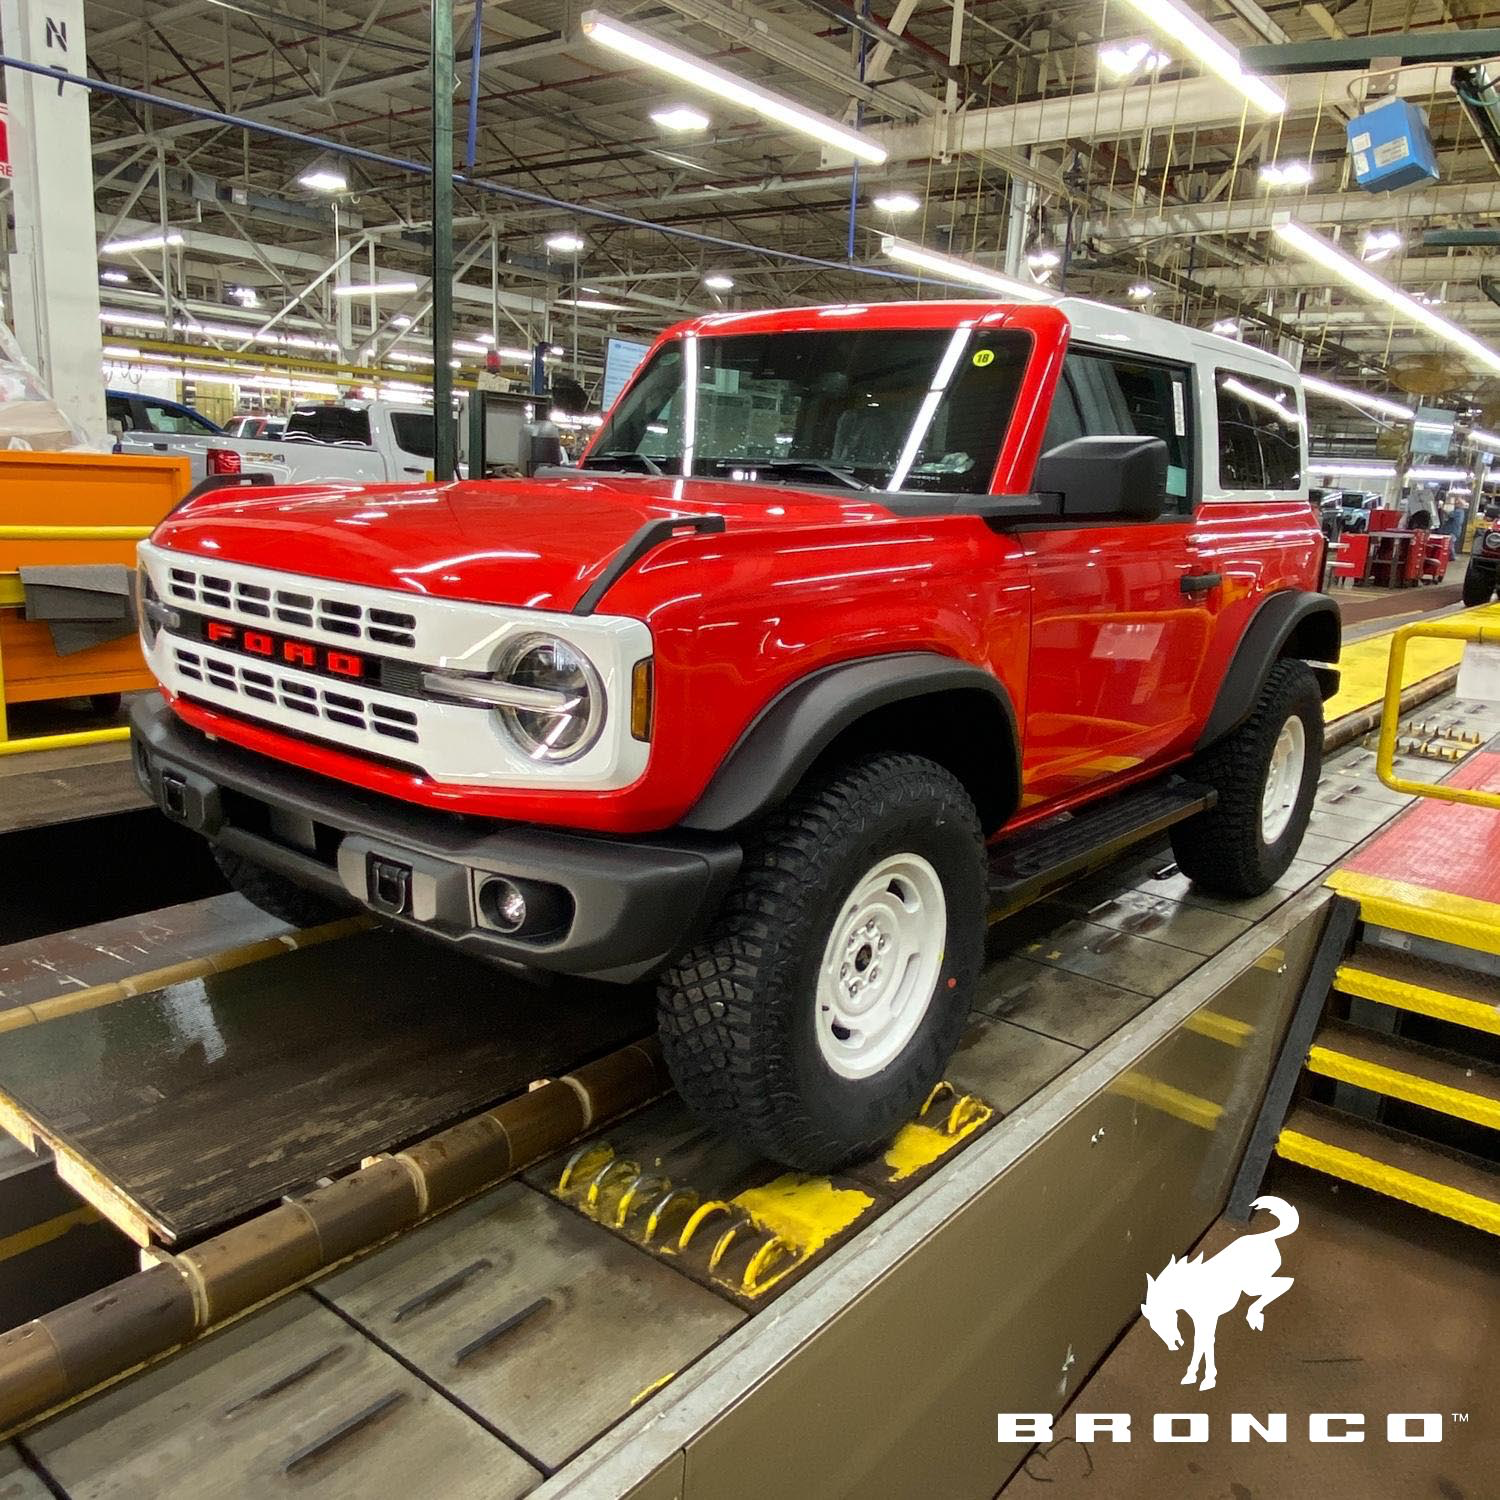 Ford Bronco Production photos? IMG_2978